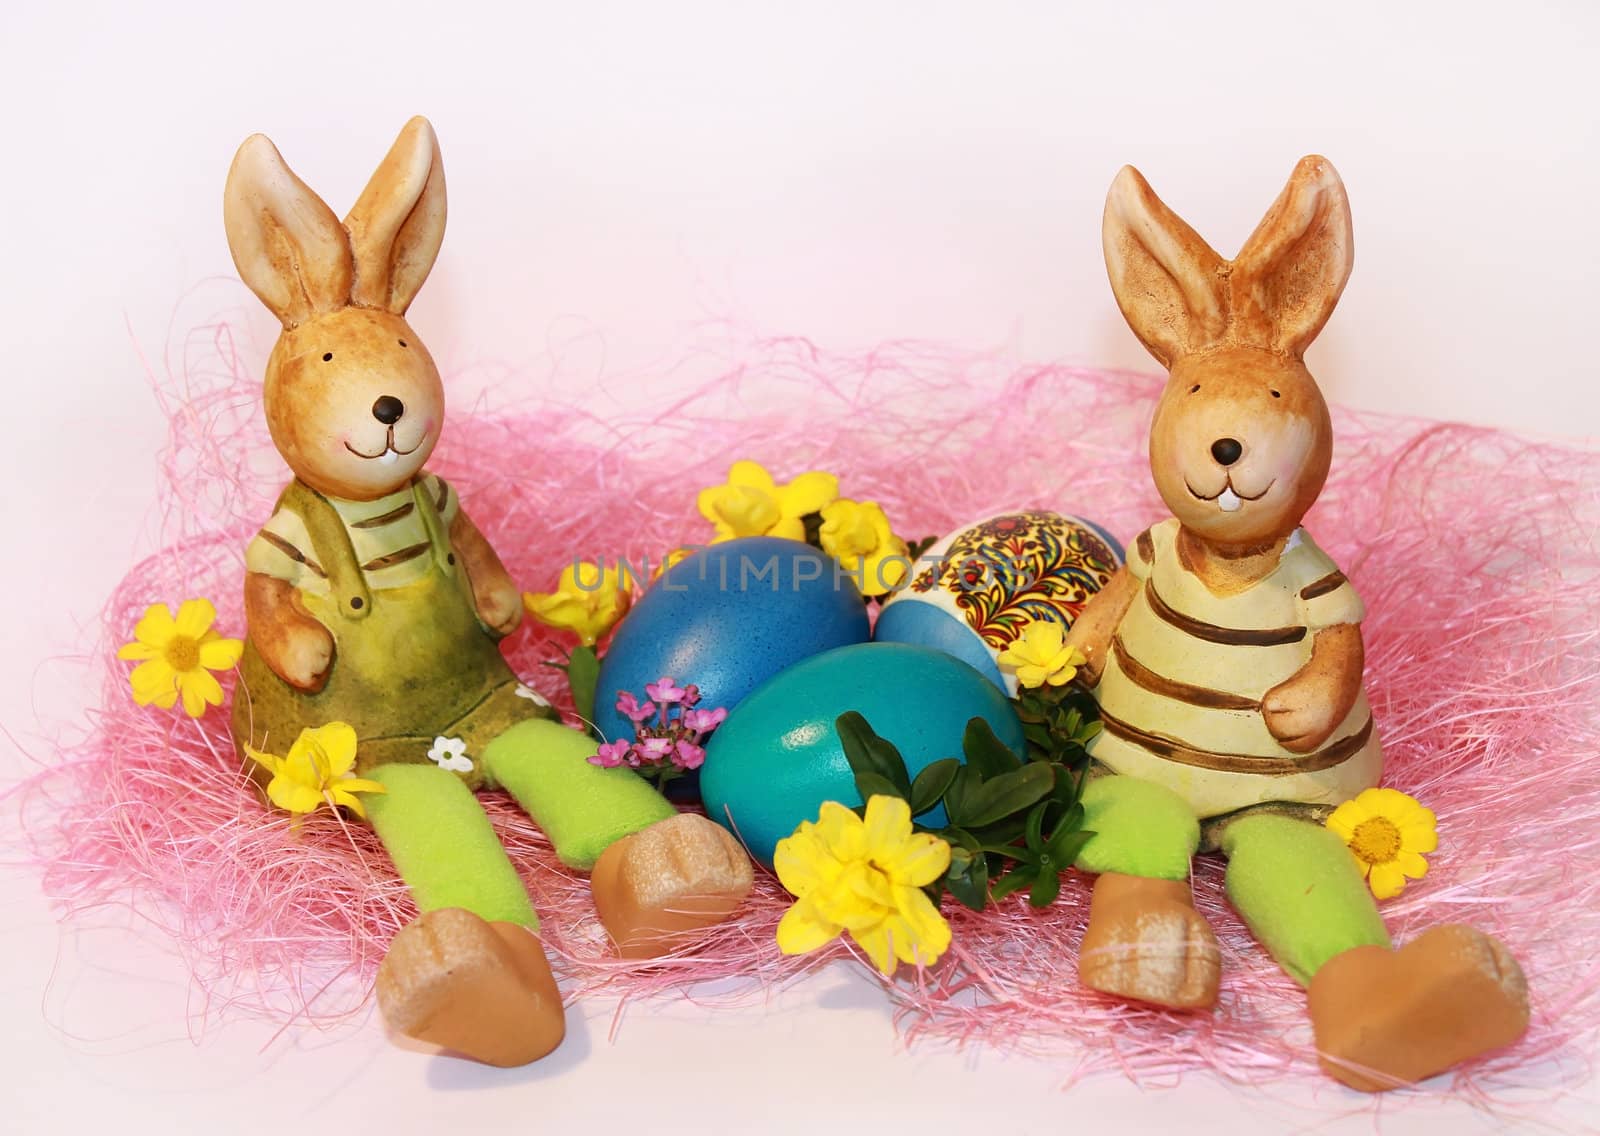 toy rabbits are sitting near the dyed Easter eggs on a white background